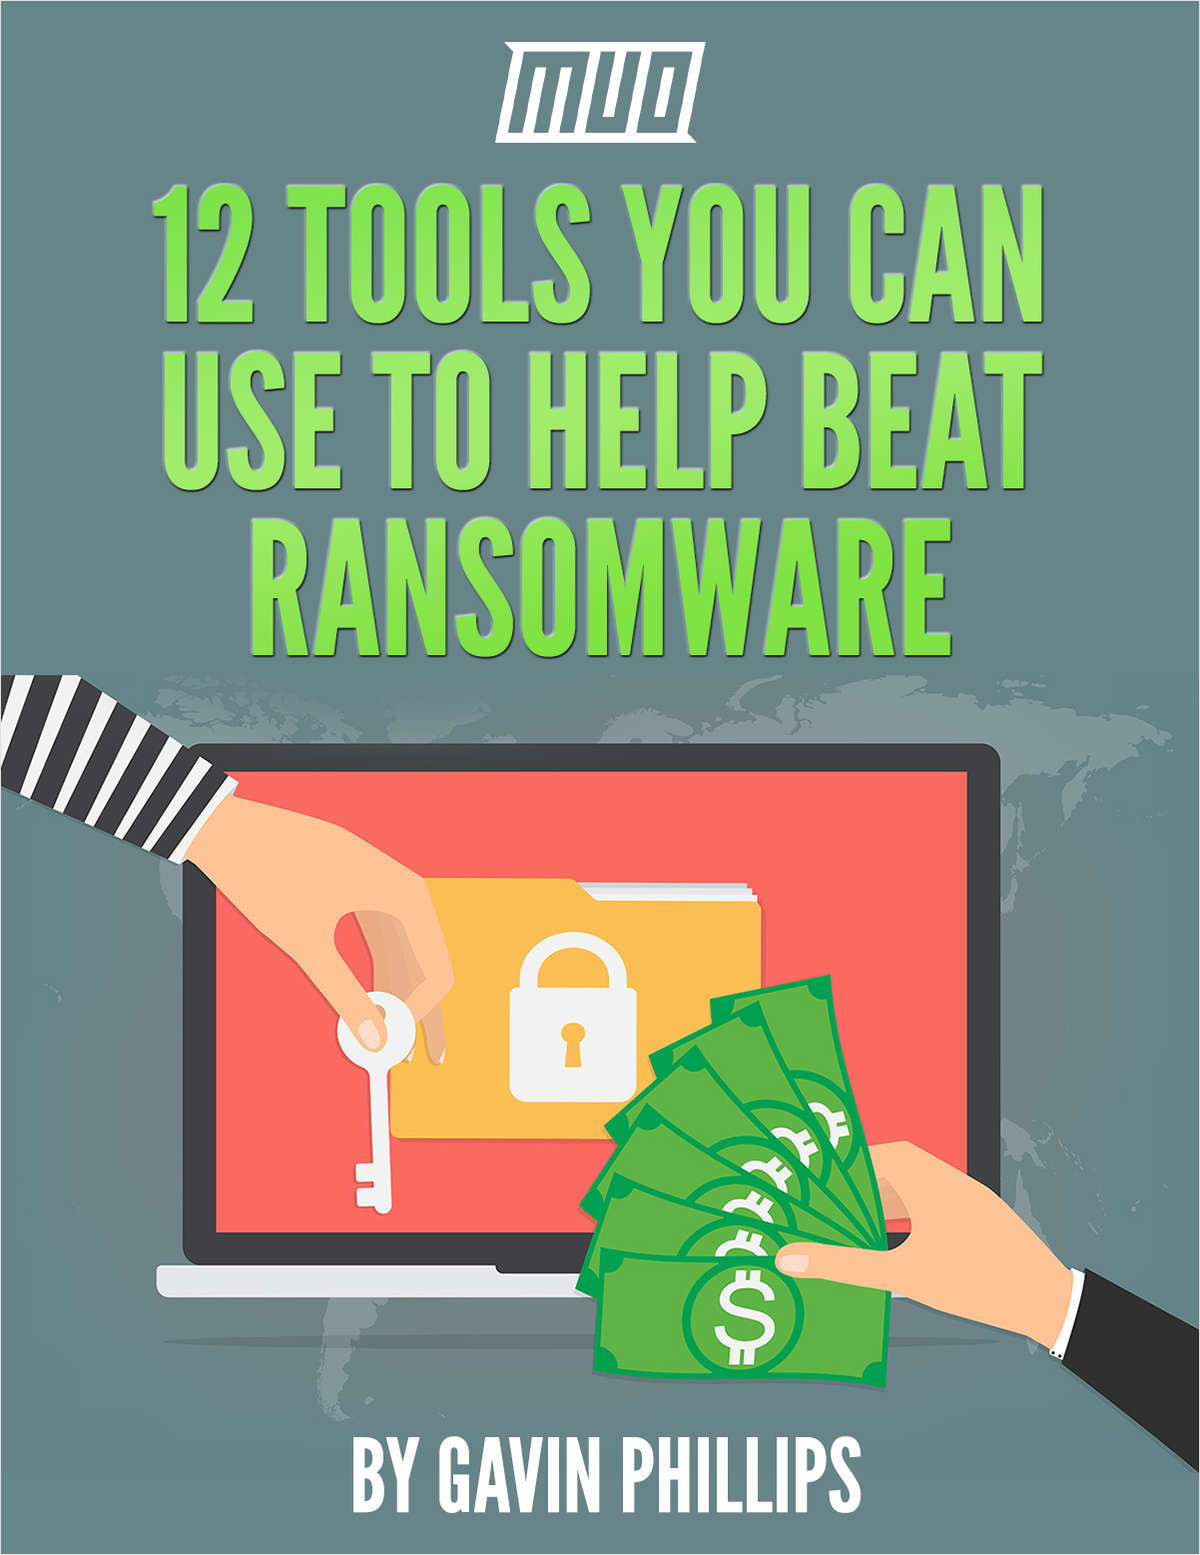 12 Tools You Can Use to Help Beat Ransomware